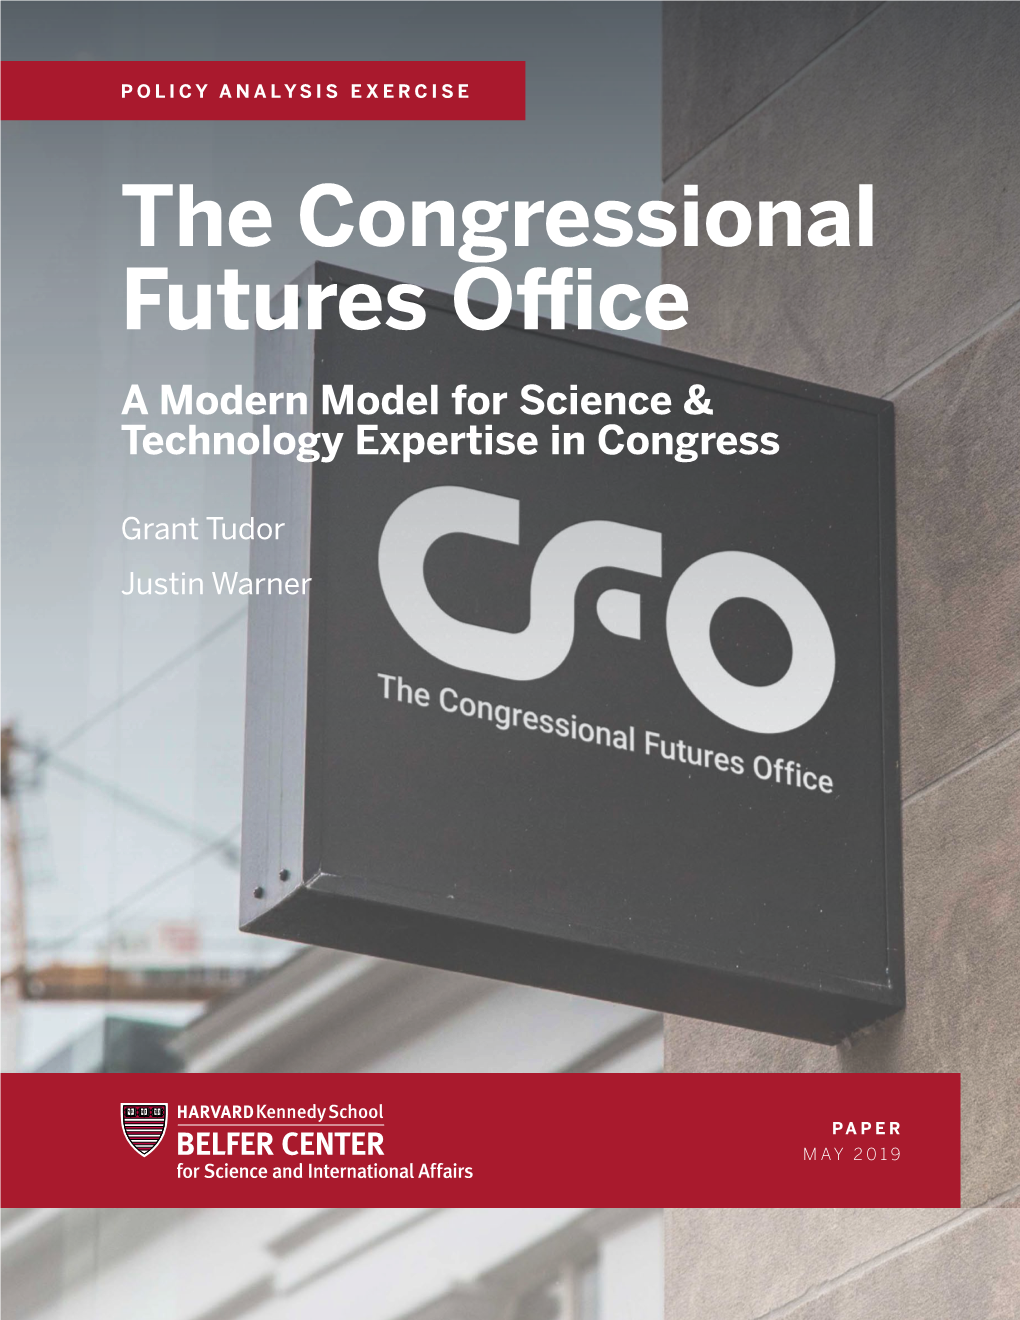 The Congressional Futures Office a Modern Model for Science & Technology Expertise in Congress